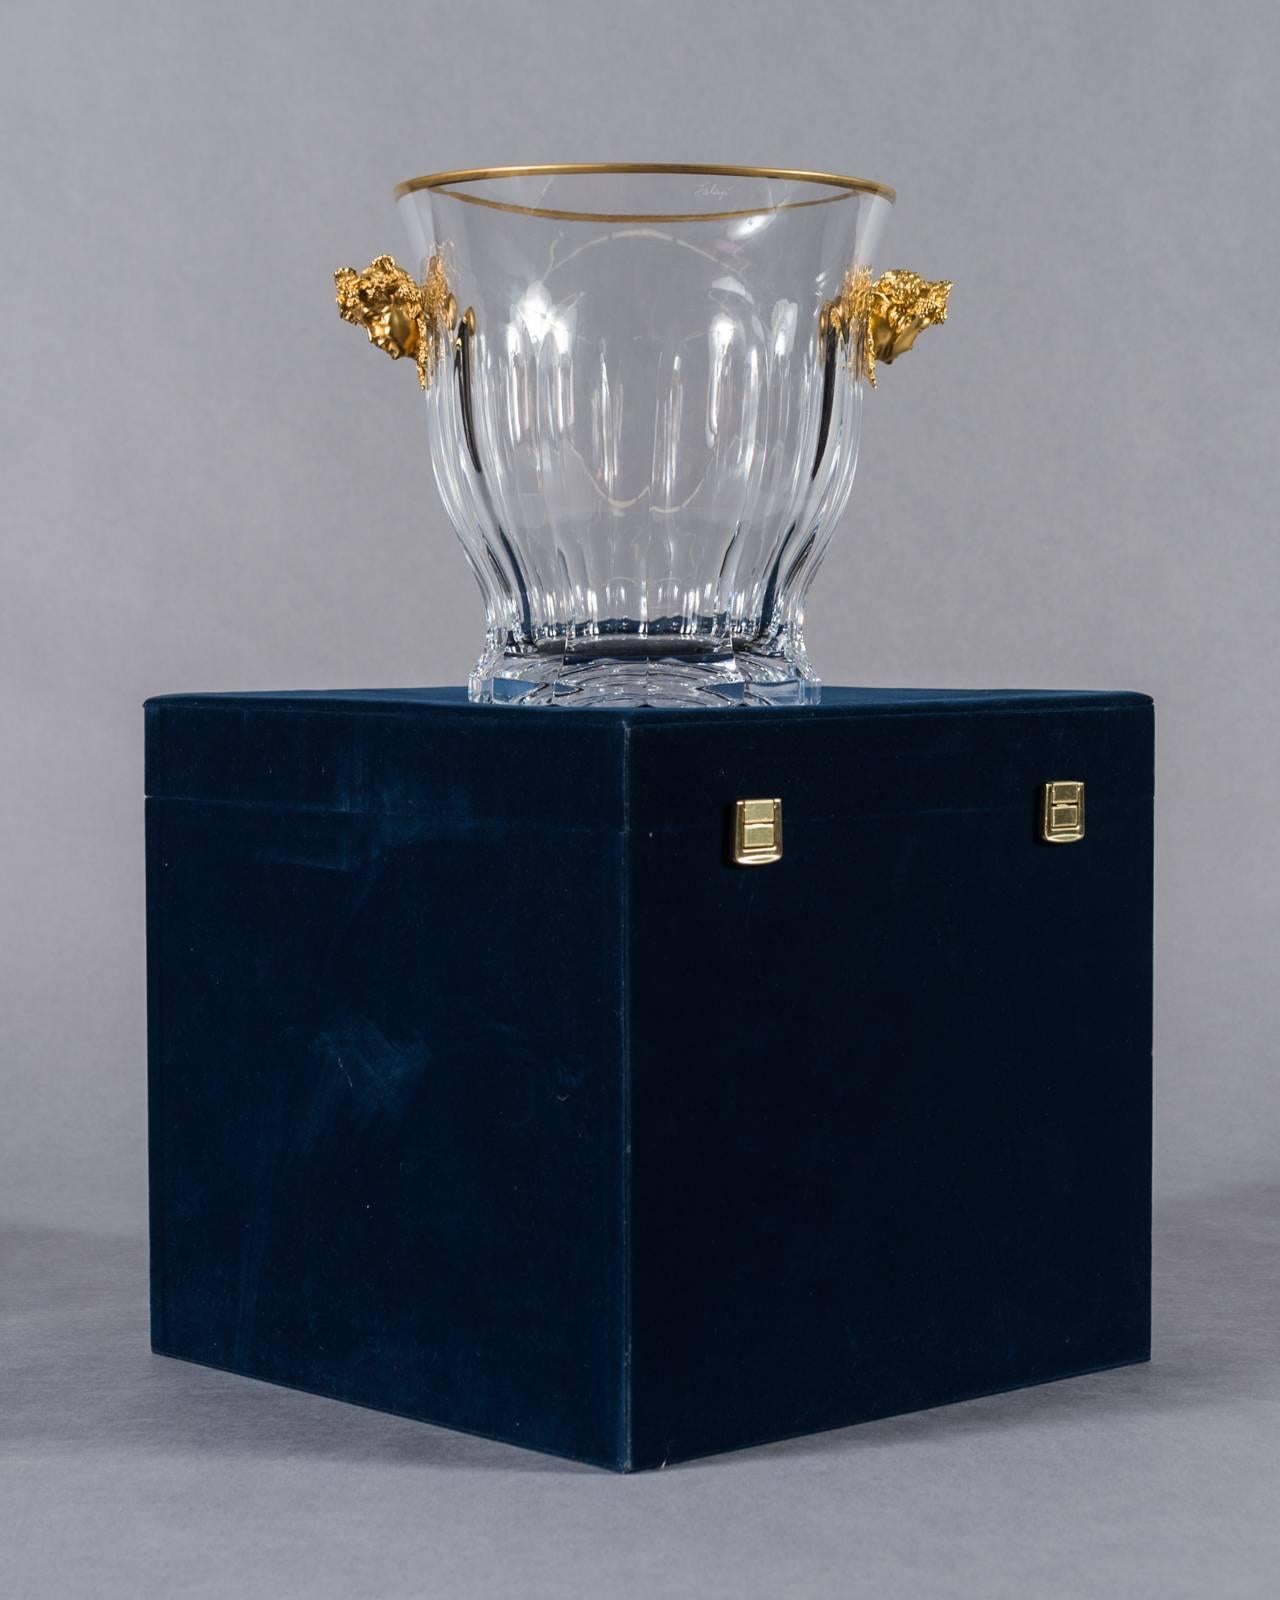 A cut crystal and gilt bronze-mounted Bacchus, Tatianna Faberge Champagne cooler

Having two gilt bronze mounts depicting Dionysus the god of the grape harvest.

Signed on Bottom Tatianna Faberge, comes with original box.

Measures: Height